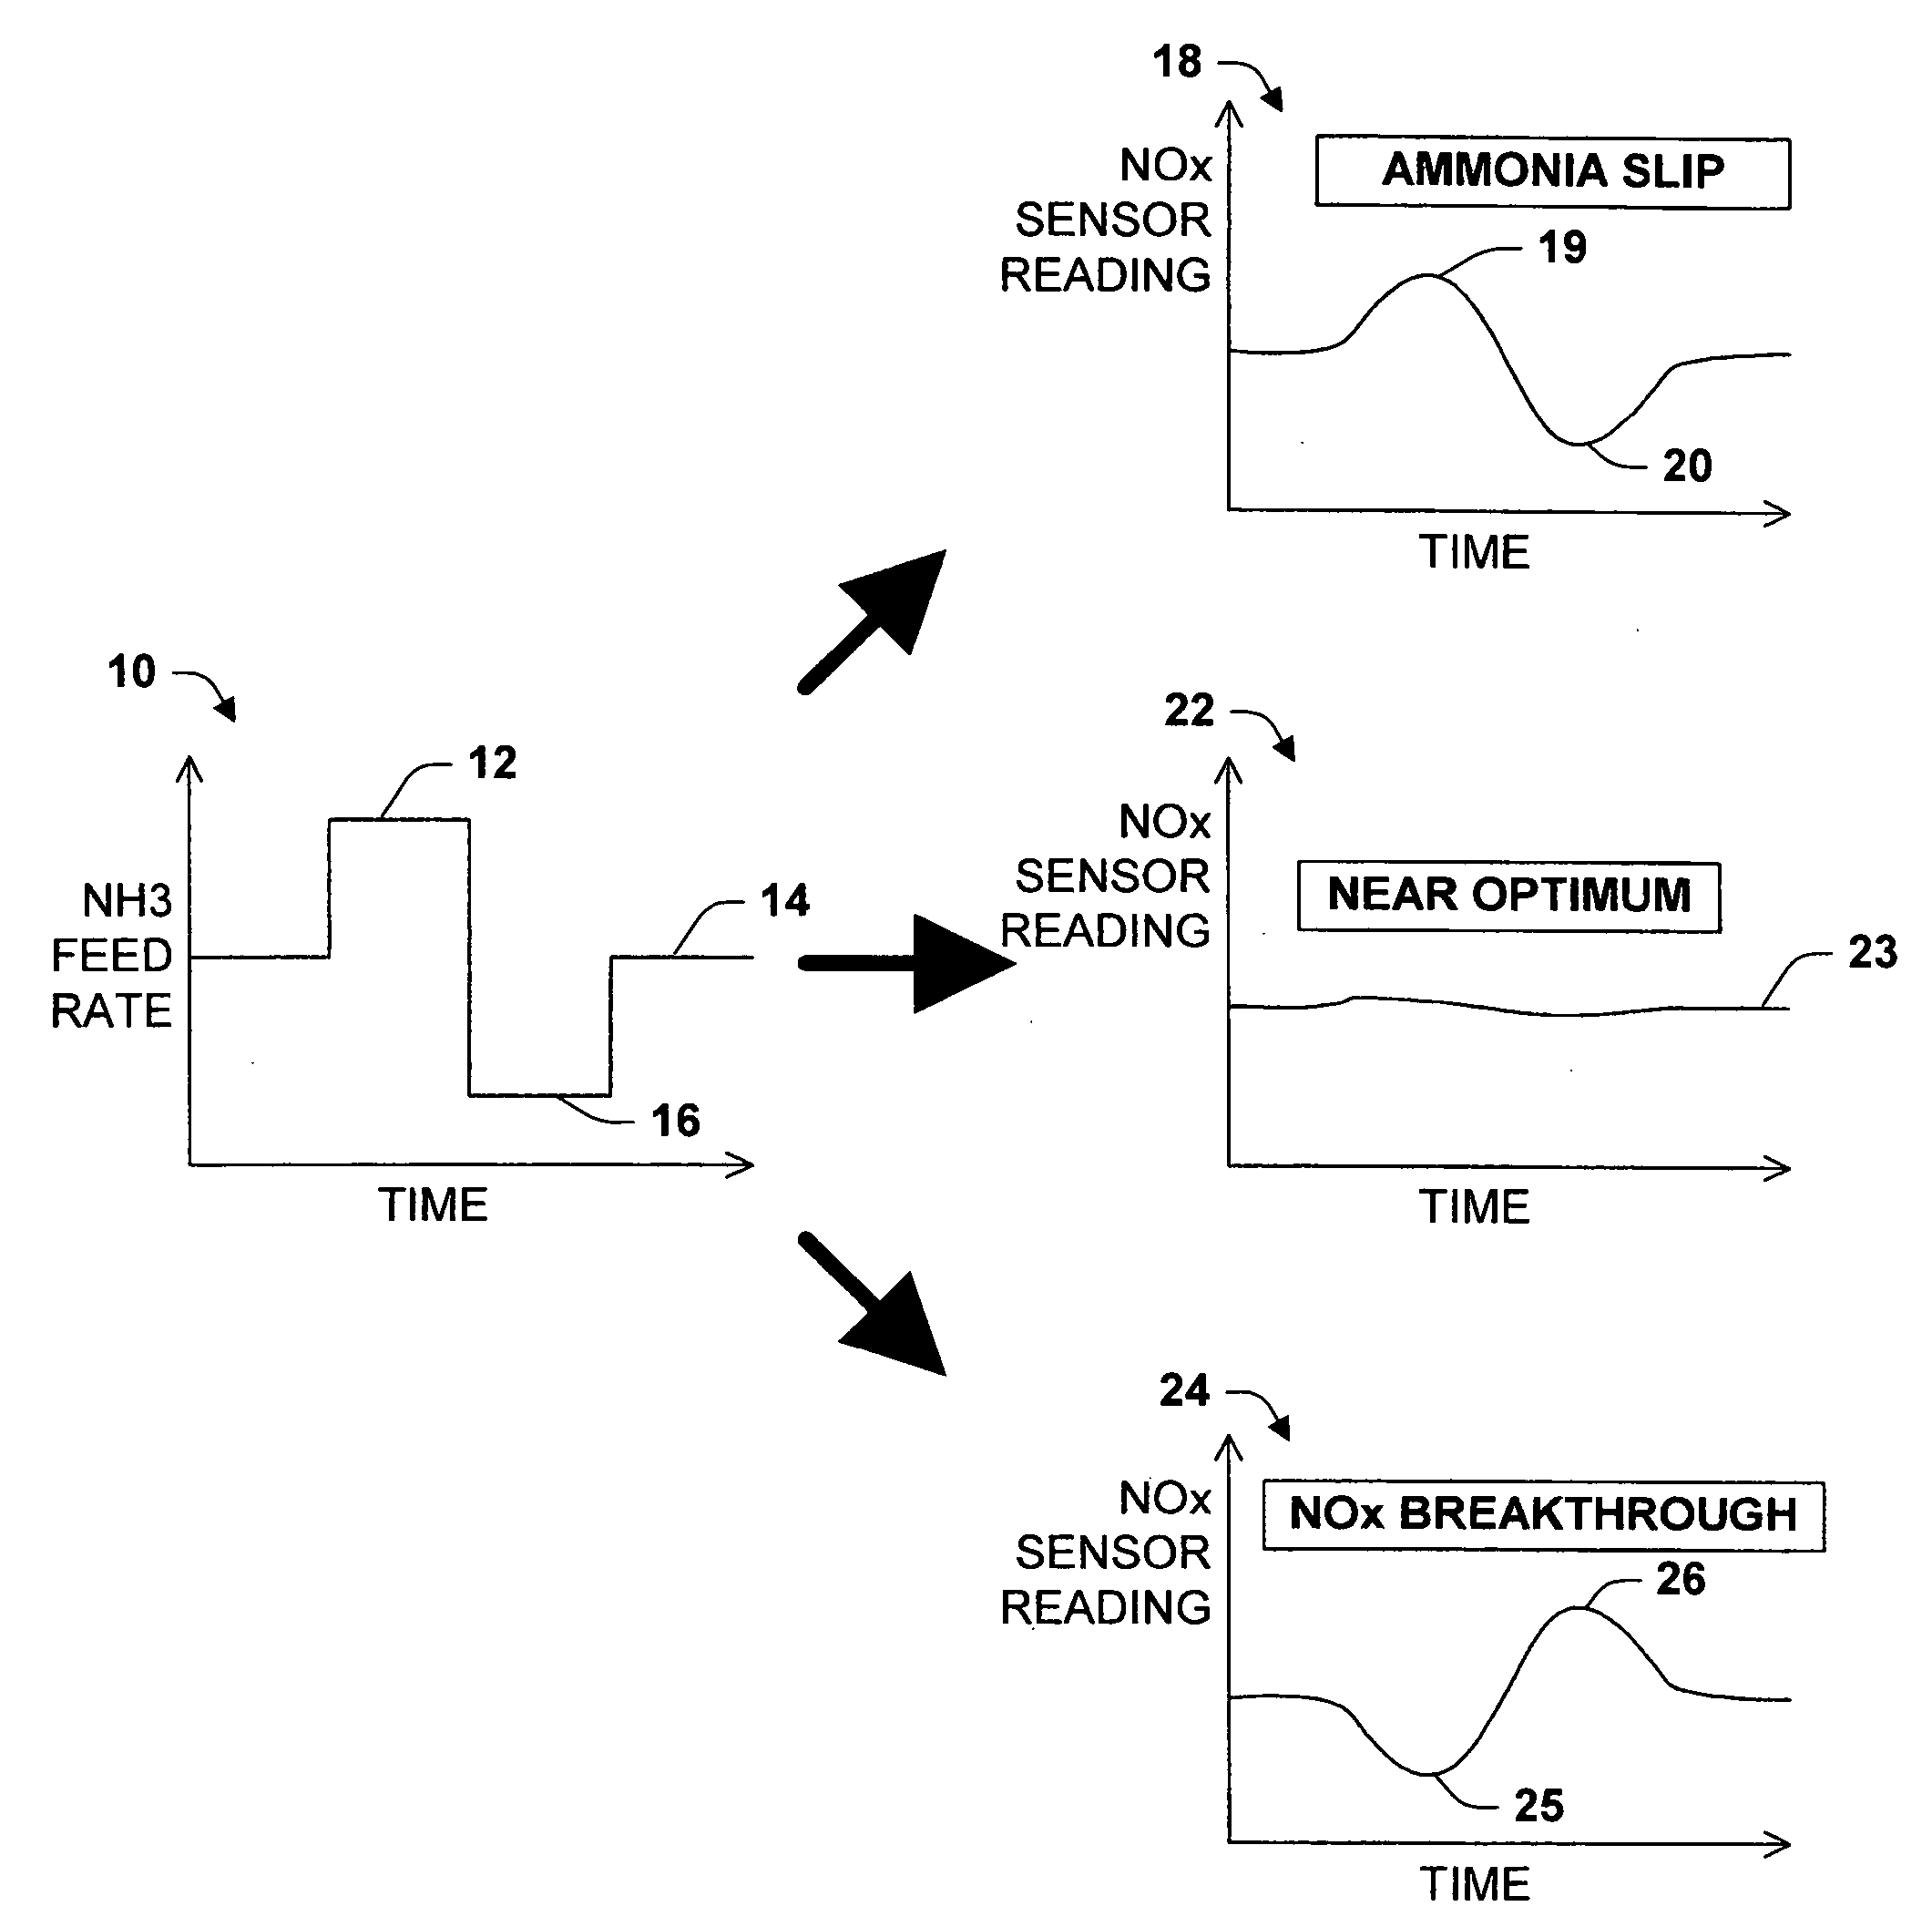 Strategy for controlling NOx emissions and ammonia slip in an SCR system using a nonselective NOx/NH3